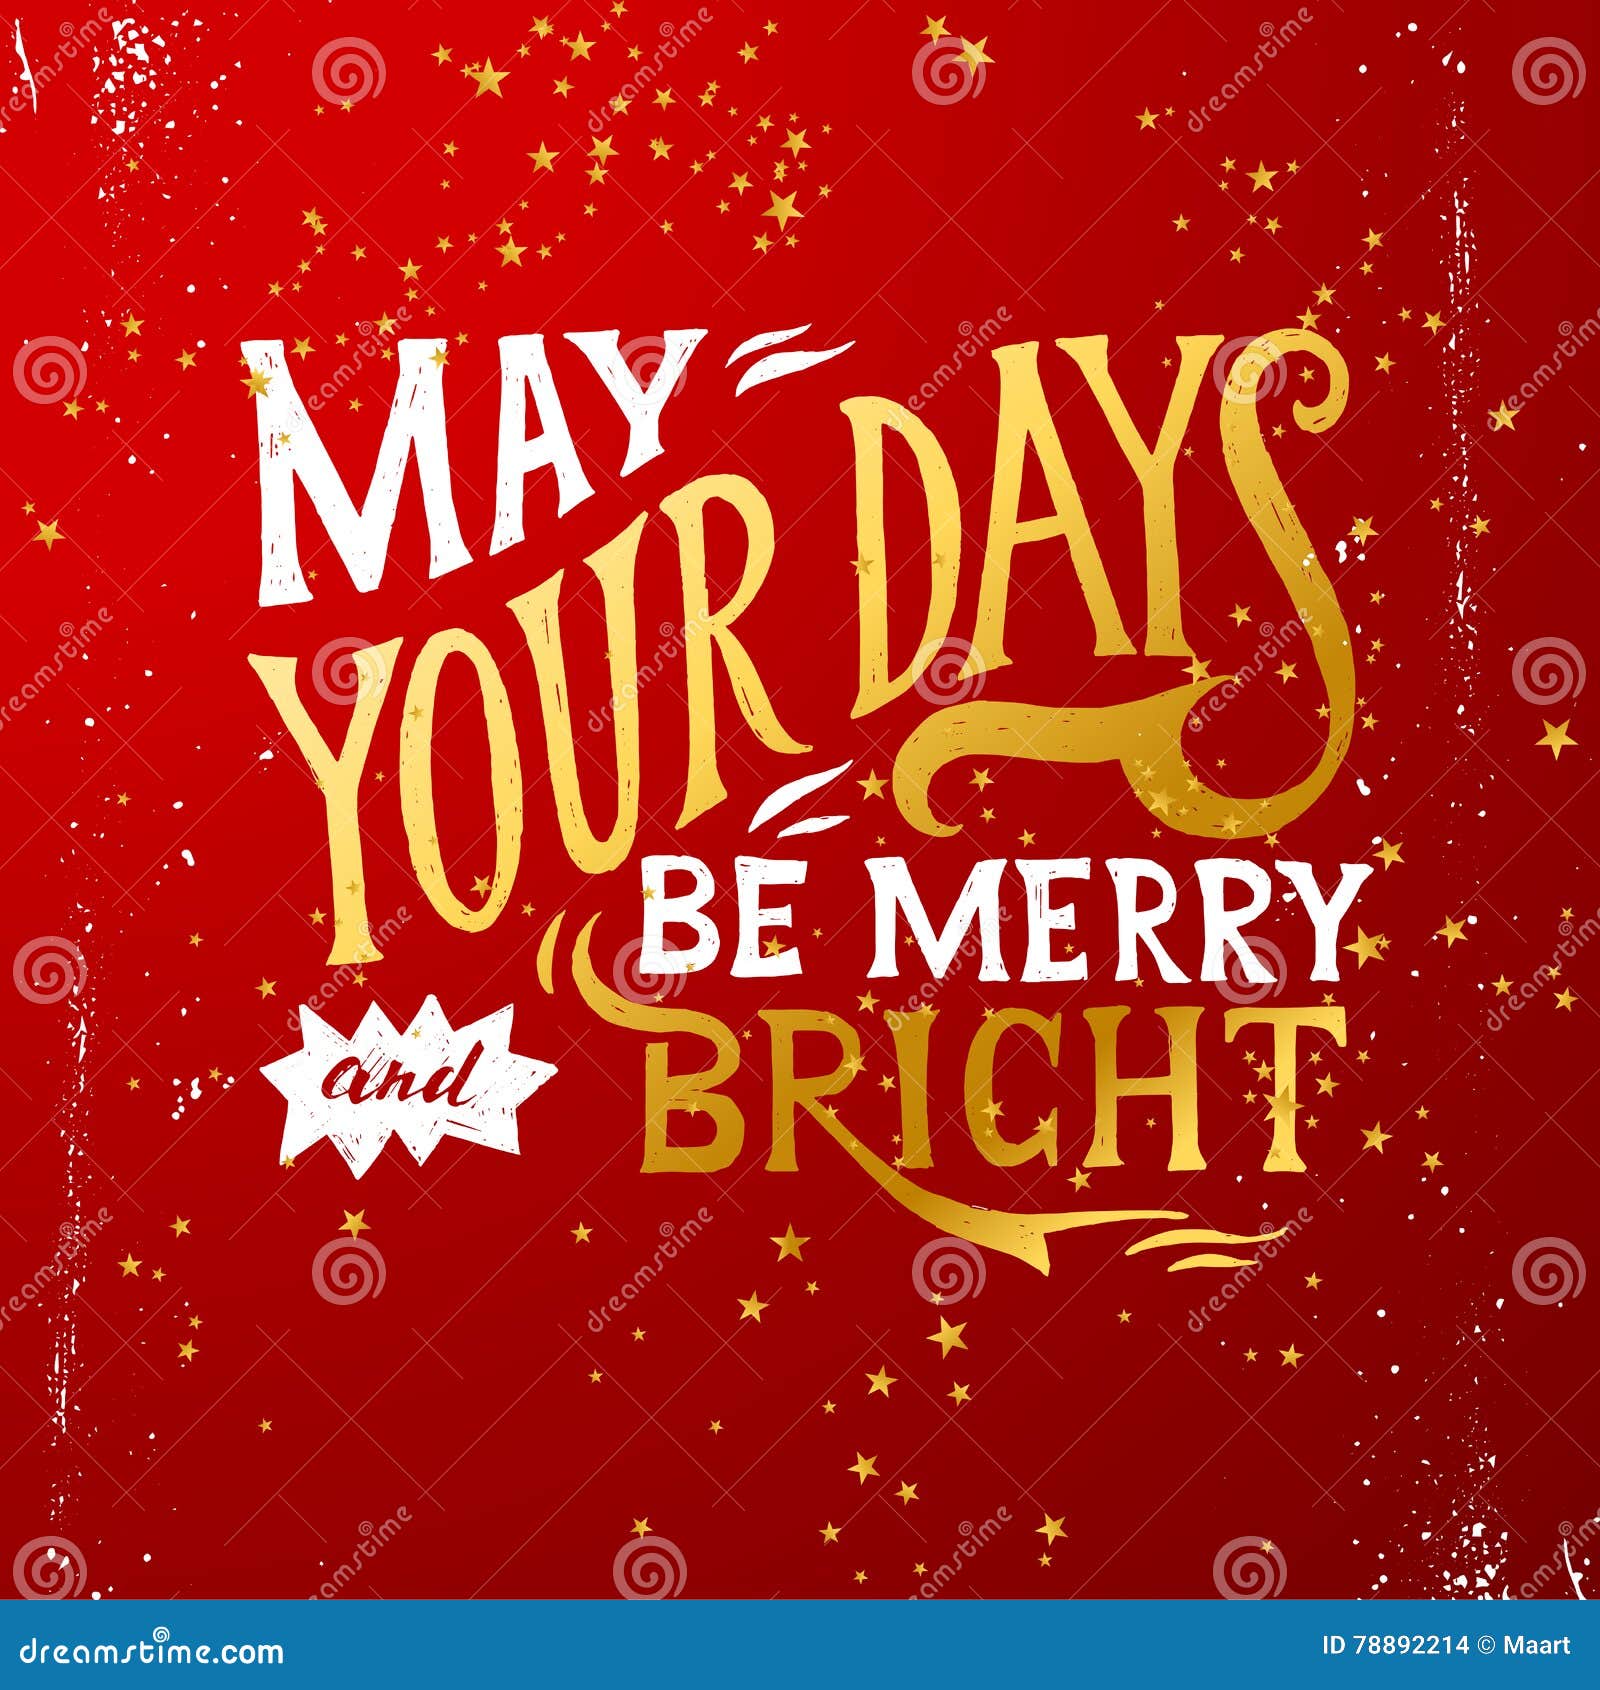 Premium Vector  May your days be merry and bright